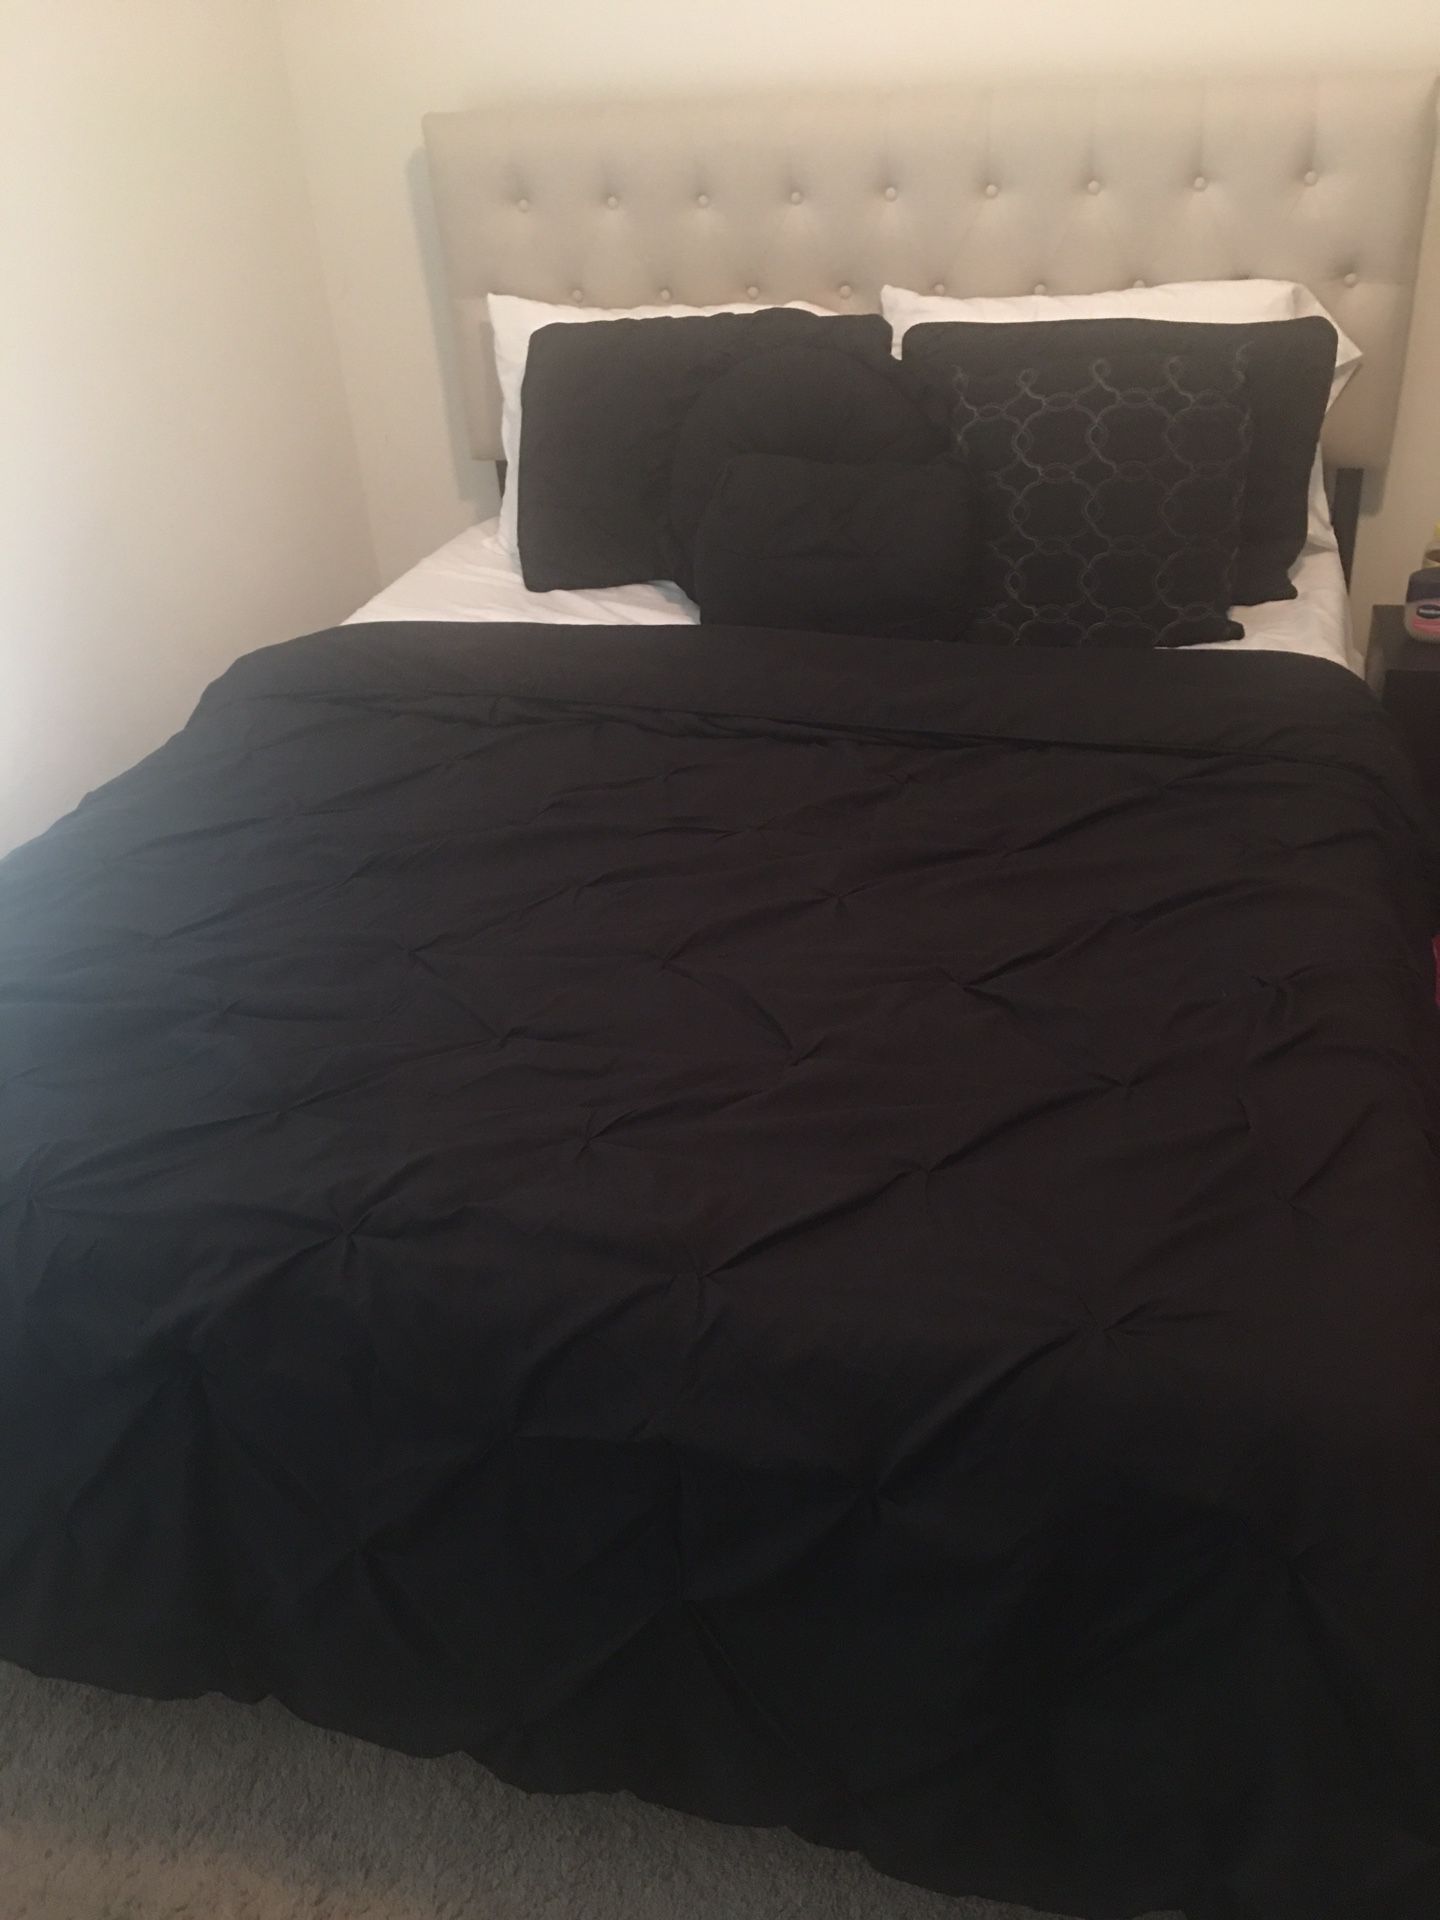 Bed, box spring, and head board, bedsheets and pillows inclusive